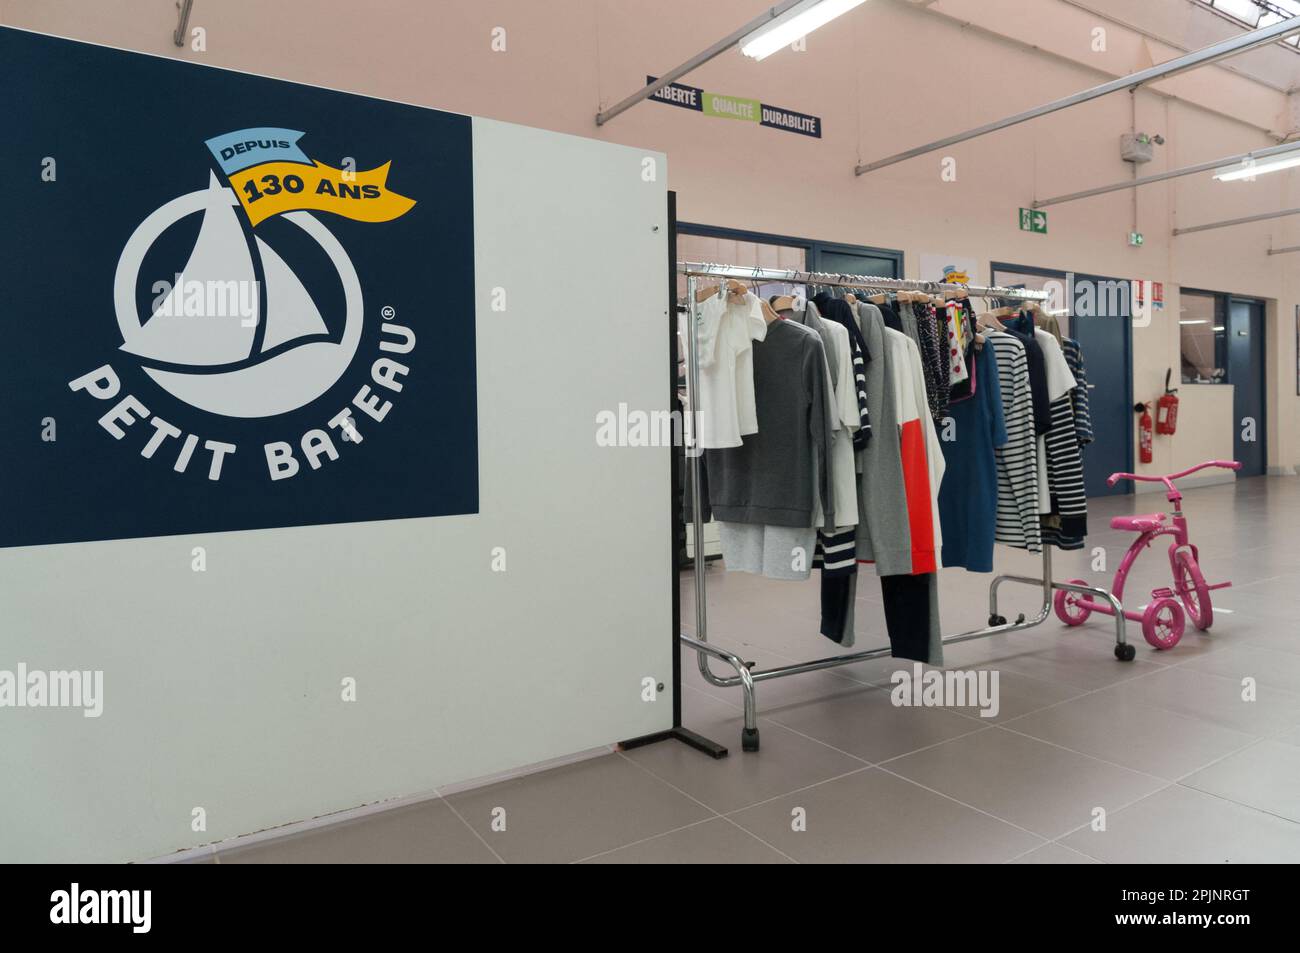 Petit Bateau to Release Special Collection to Celebrate its 130th